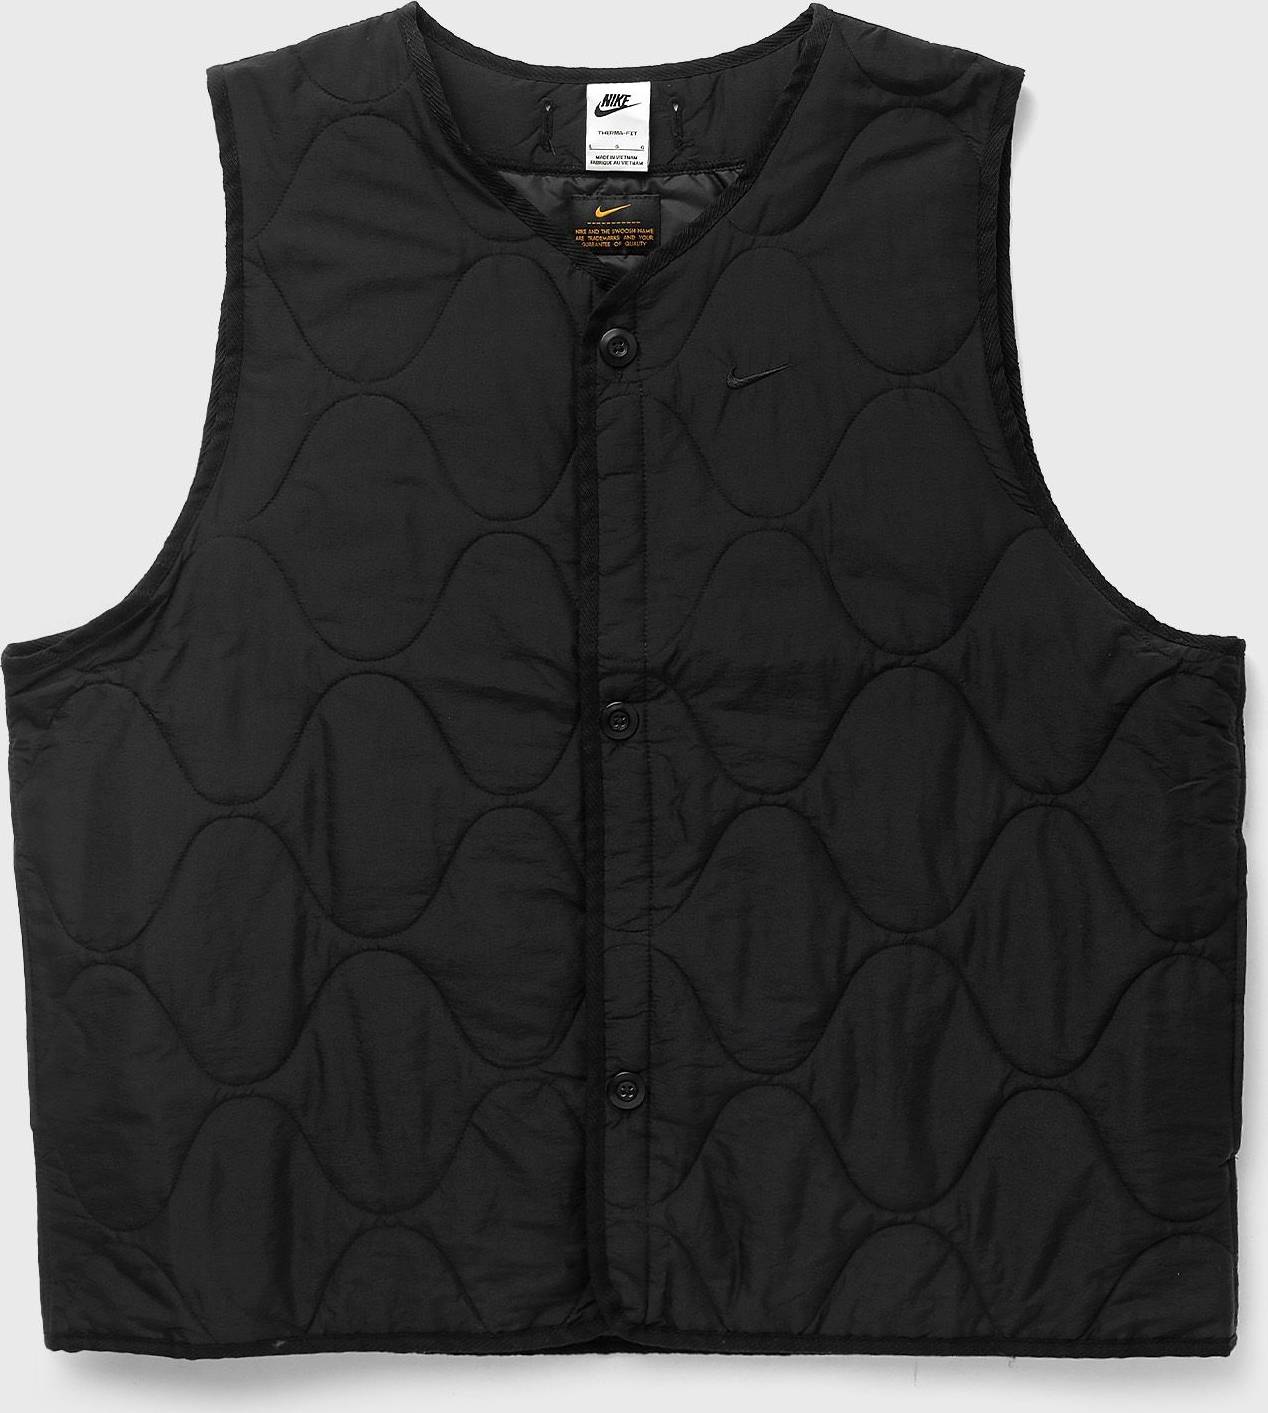 Nike Woven Insulated Military Vest, Black